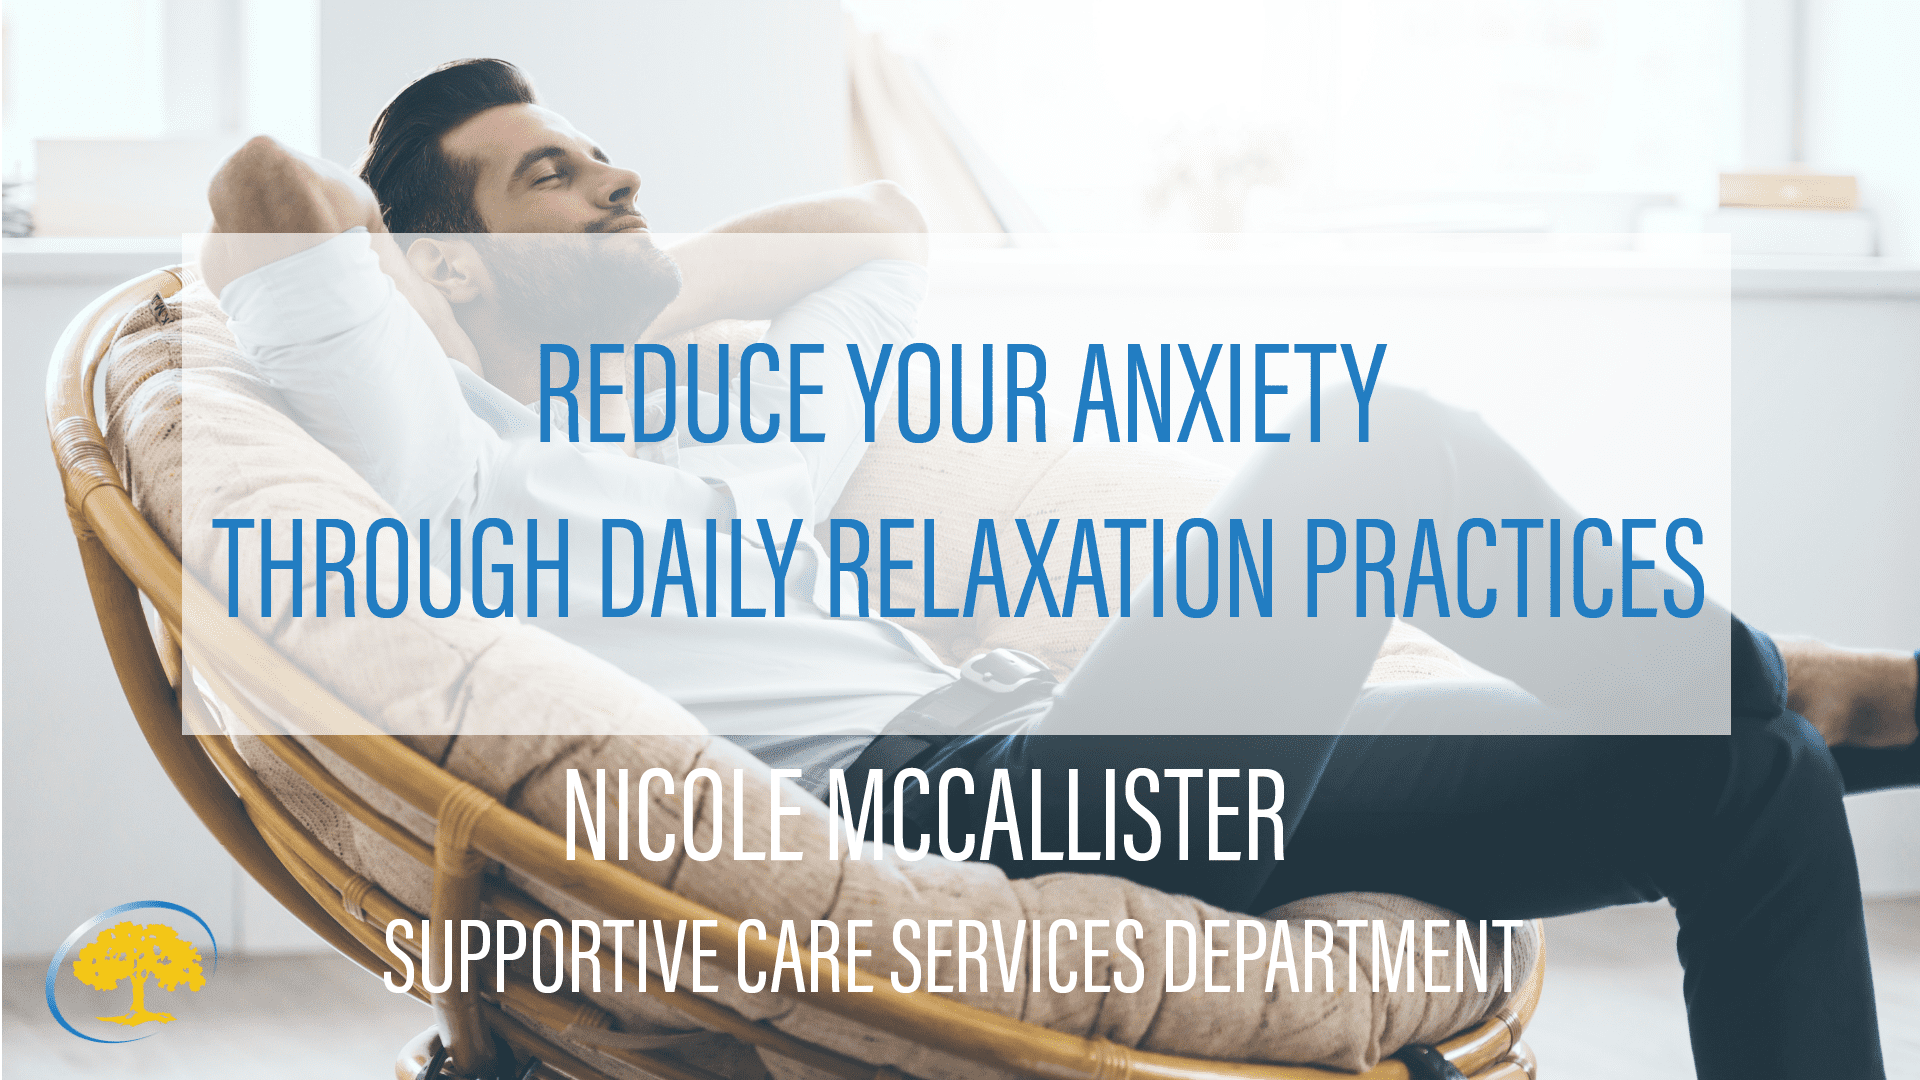 REDUCE YOUR ANXIETY THROUGH DAILY RELAXATION PRACTICES